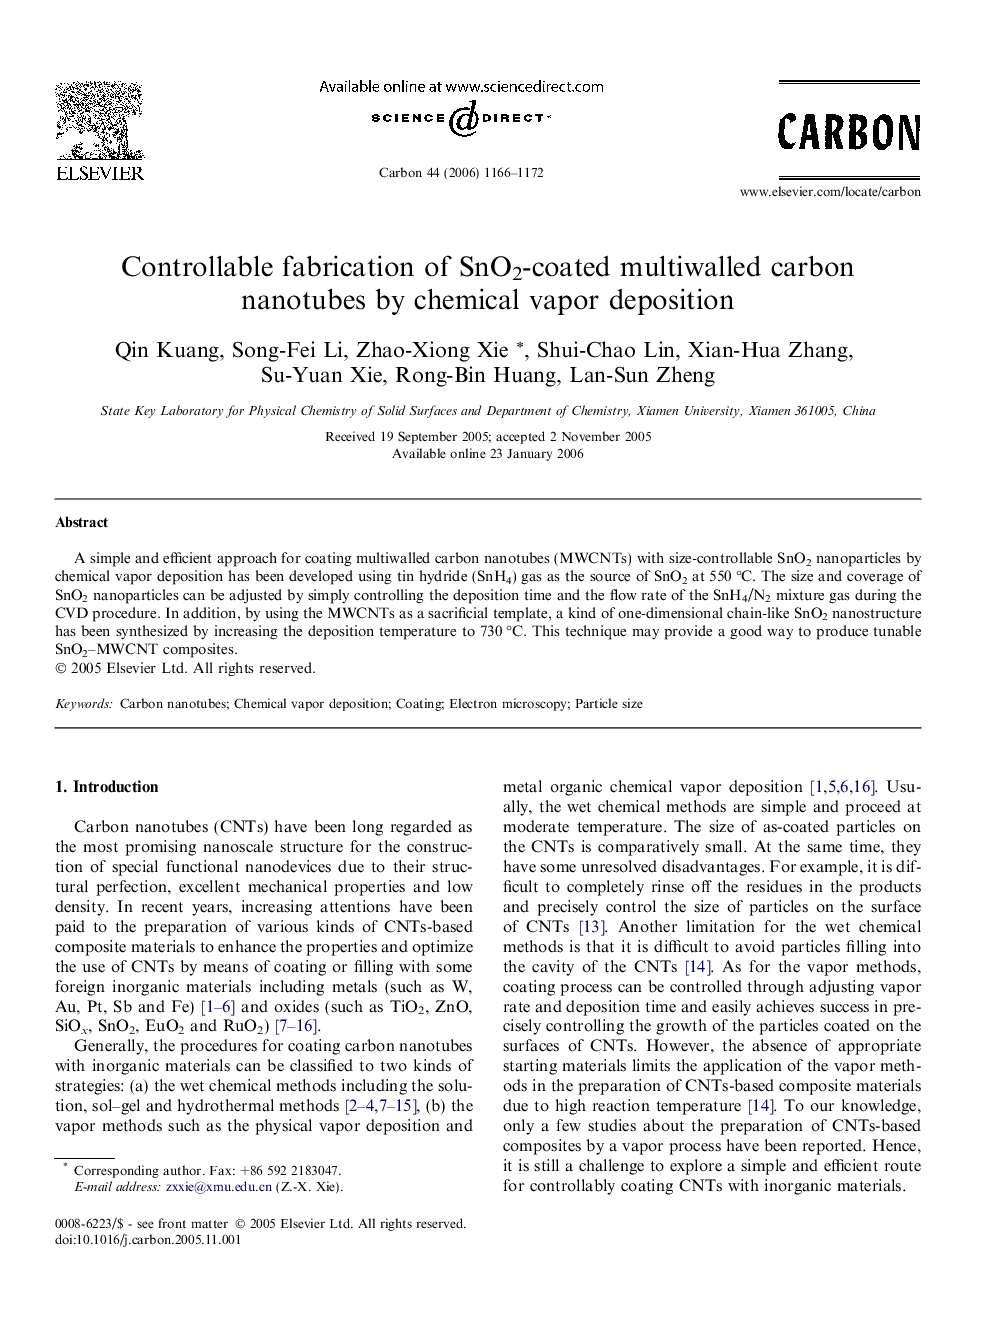 Controllable fabrication of SnO2-coated multiwalled carbon nanotubes by chemical vapor deposition